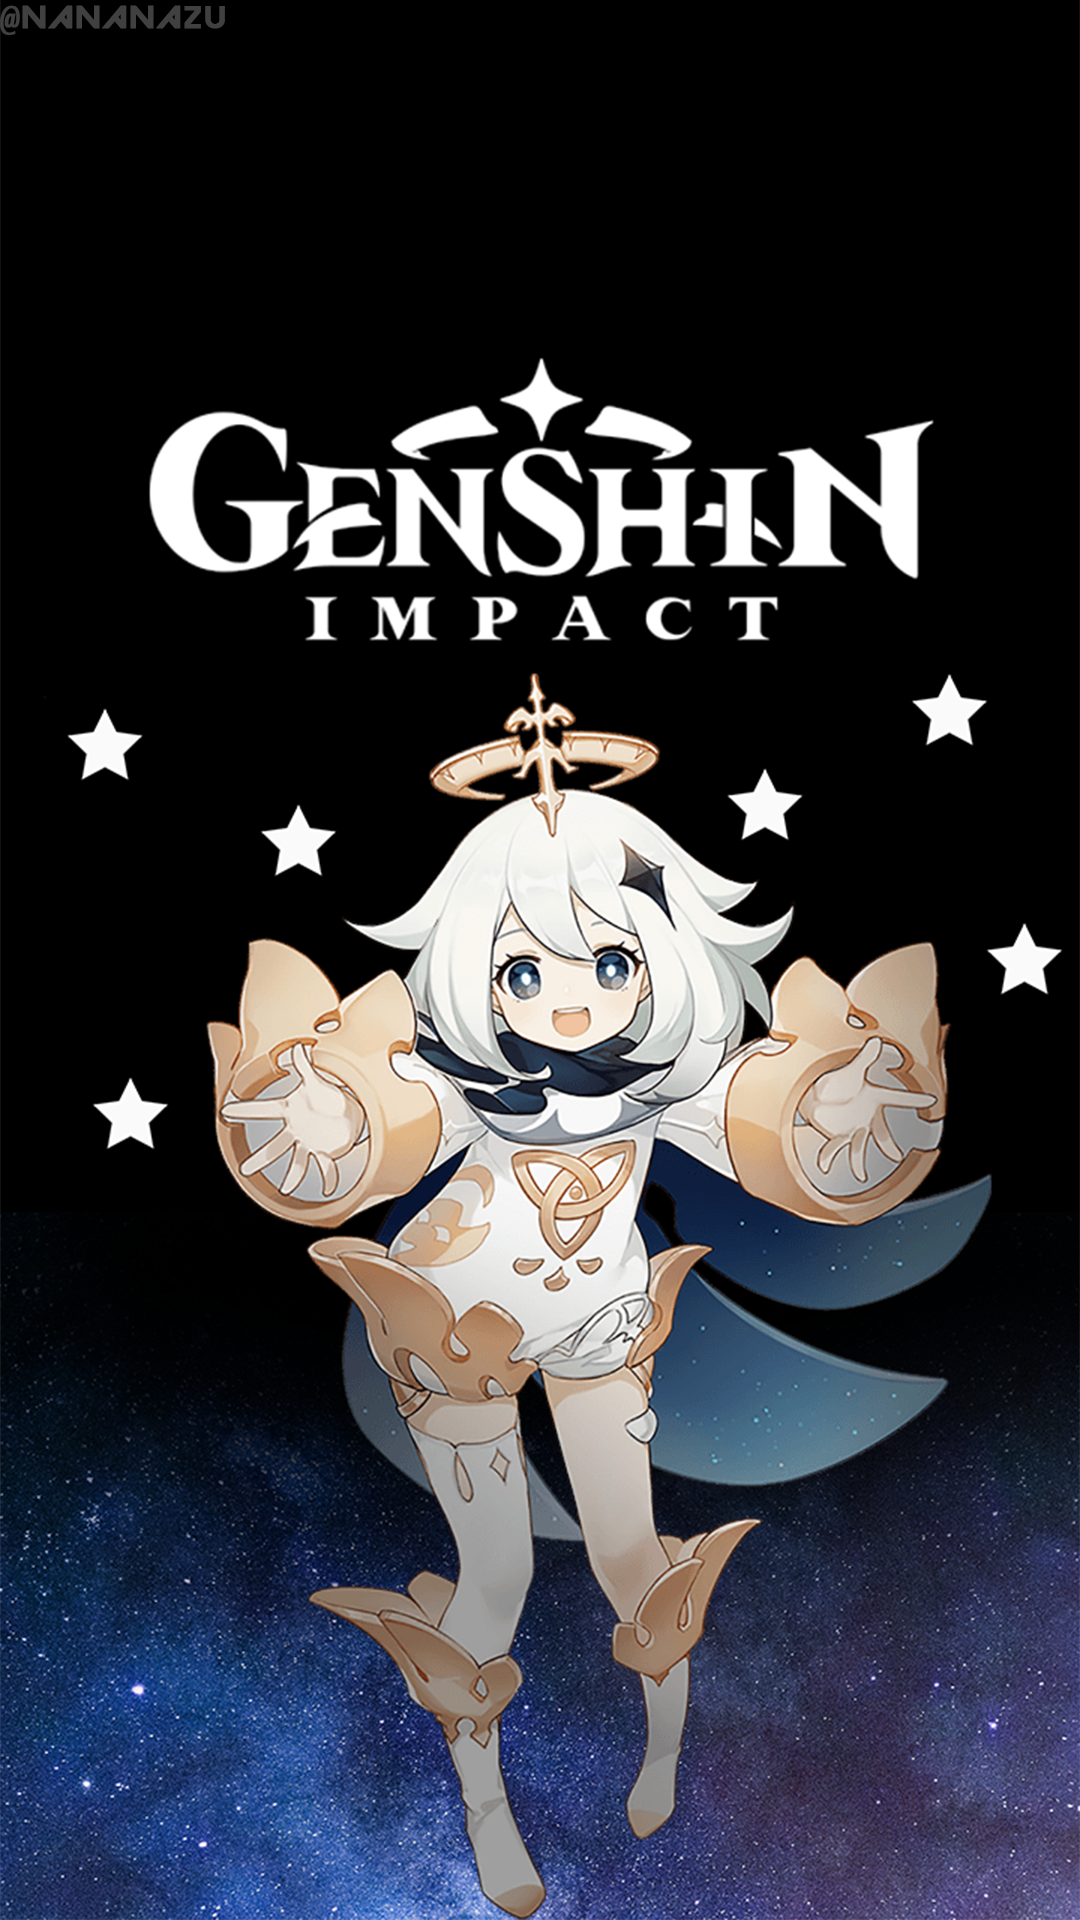 genshin impact total size android 2021